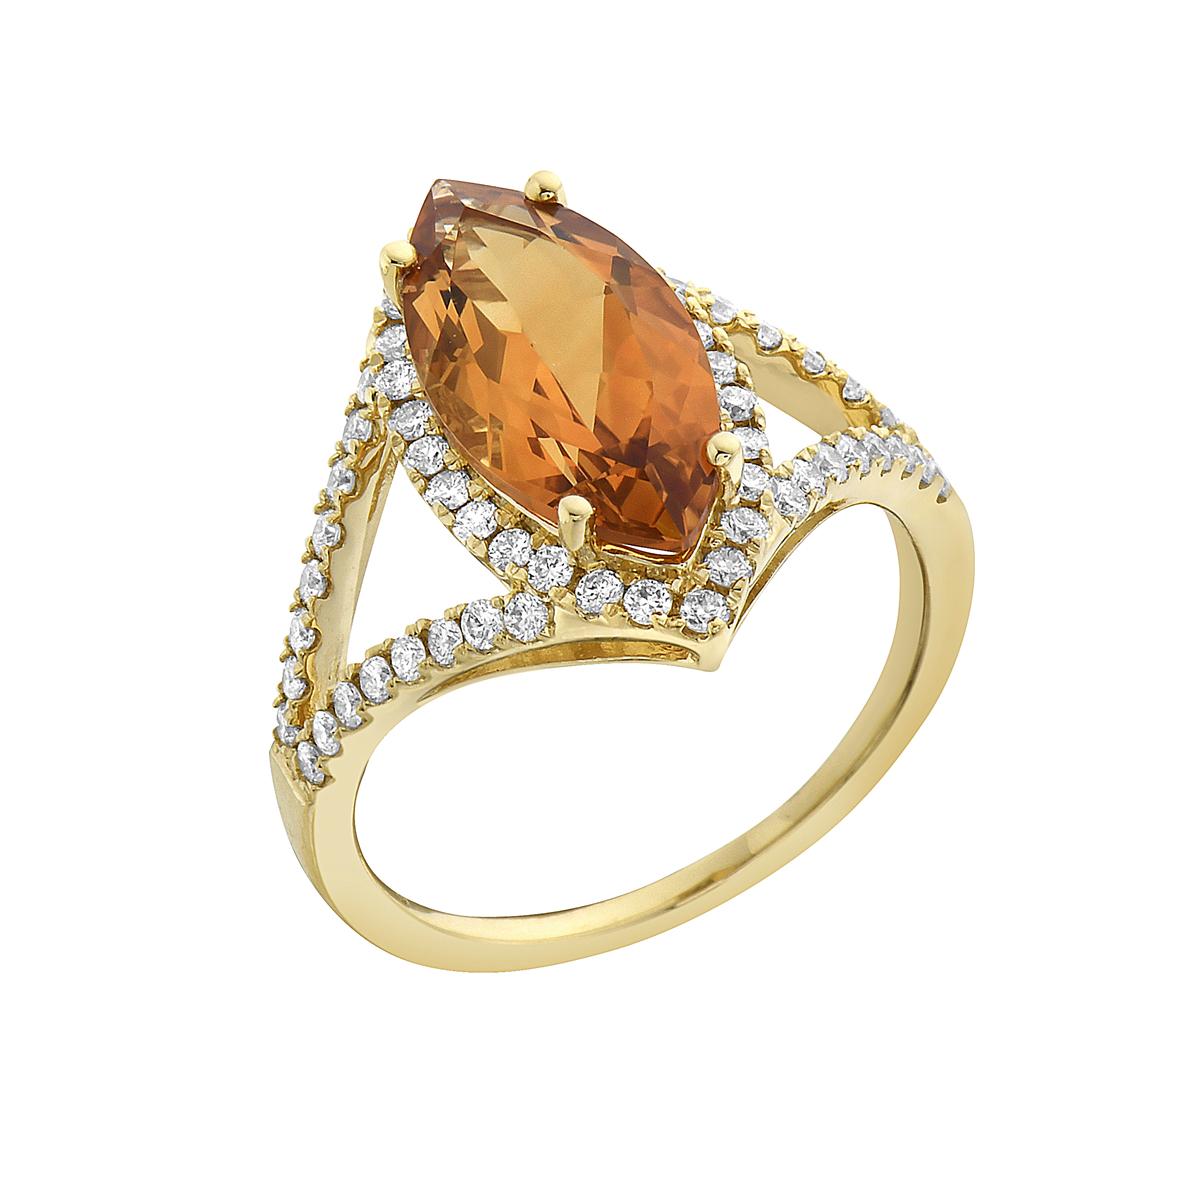 With this exquisite semi-precious yellow gold citrine marquise cut diamond ring, style and glamour are in the spotlight. This 14-karat ring is made from 3.0 grams of gold and 1 citrine totaling 2.73 karats. This ring is also surrounded by 58 round